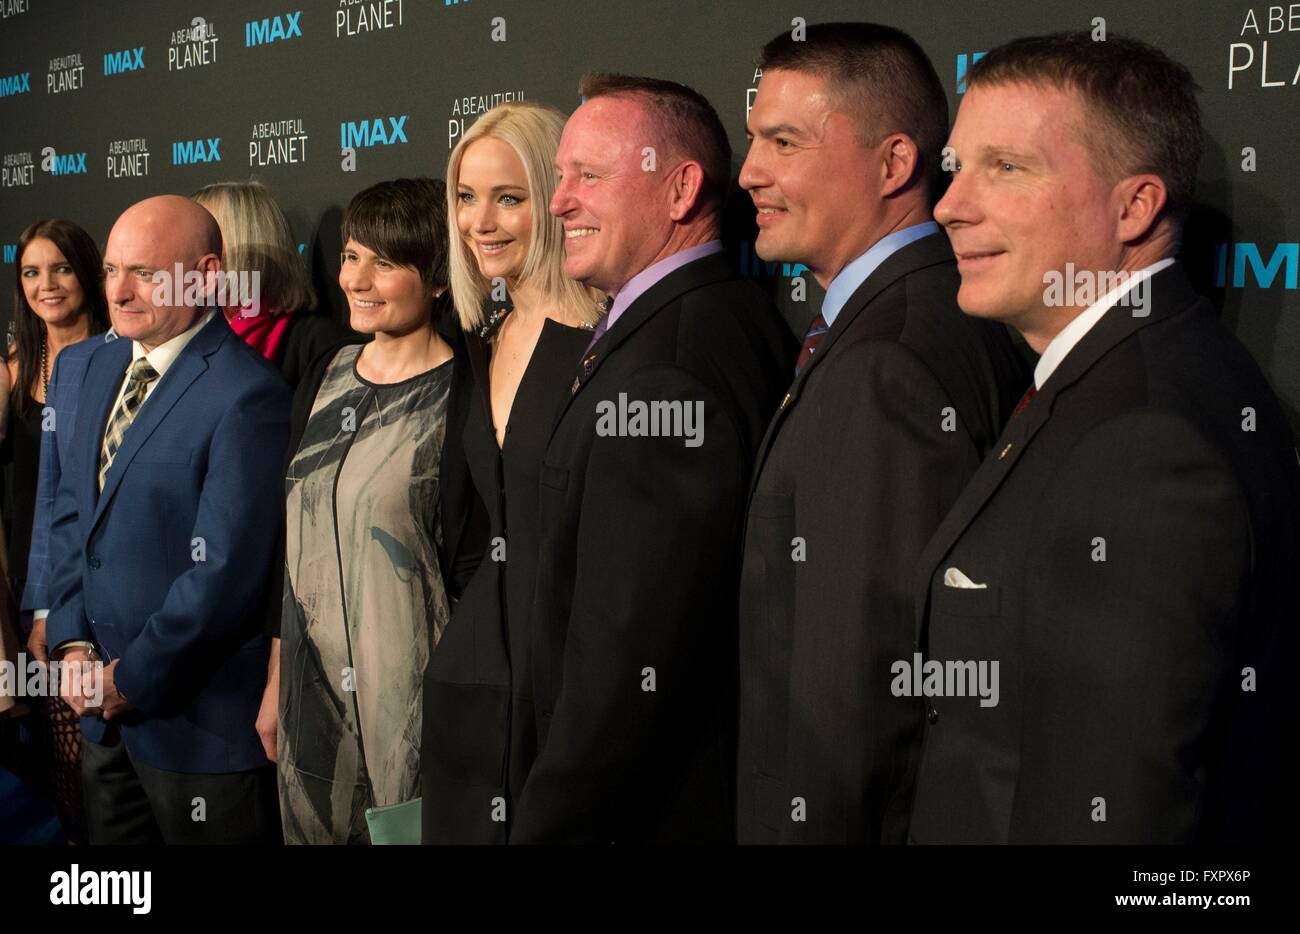 New York, USA. 16th Apr, 2016. Actress Jennifer Lawrence poses for a photo with astronauts as they arrive for the world Premiere of the IMAX film A Beautiful Planet at AMC Lowes Lincoln Square theater April 16, 2016 in New York City. Astronauts are (L-R): Former NASA astronaut Scott Kelly, ESA astronaut Samantha Cristoforetti, NASA astronaut Barry Wilmore, NASA astronaut Kjell Lindgren, and NASA astronaut Terry Virts. Credit:  Planetpix/Alamy Live News Stock Photo